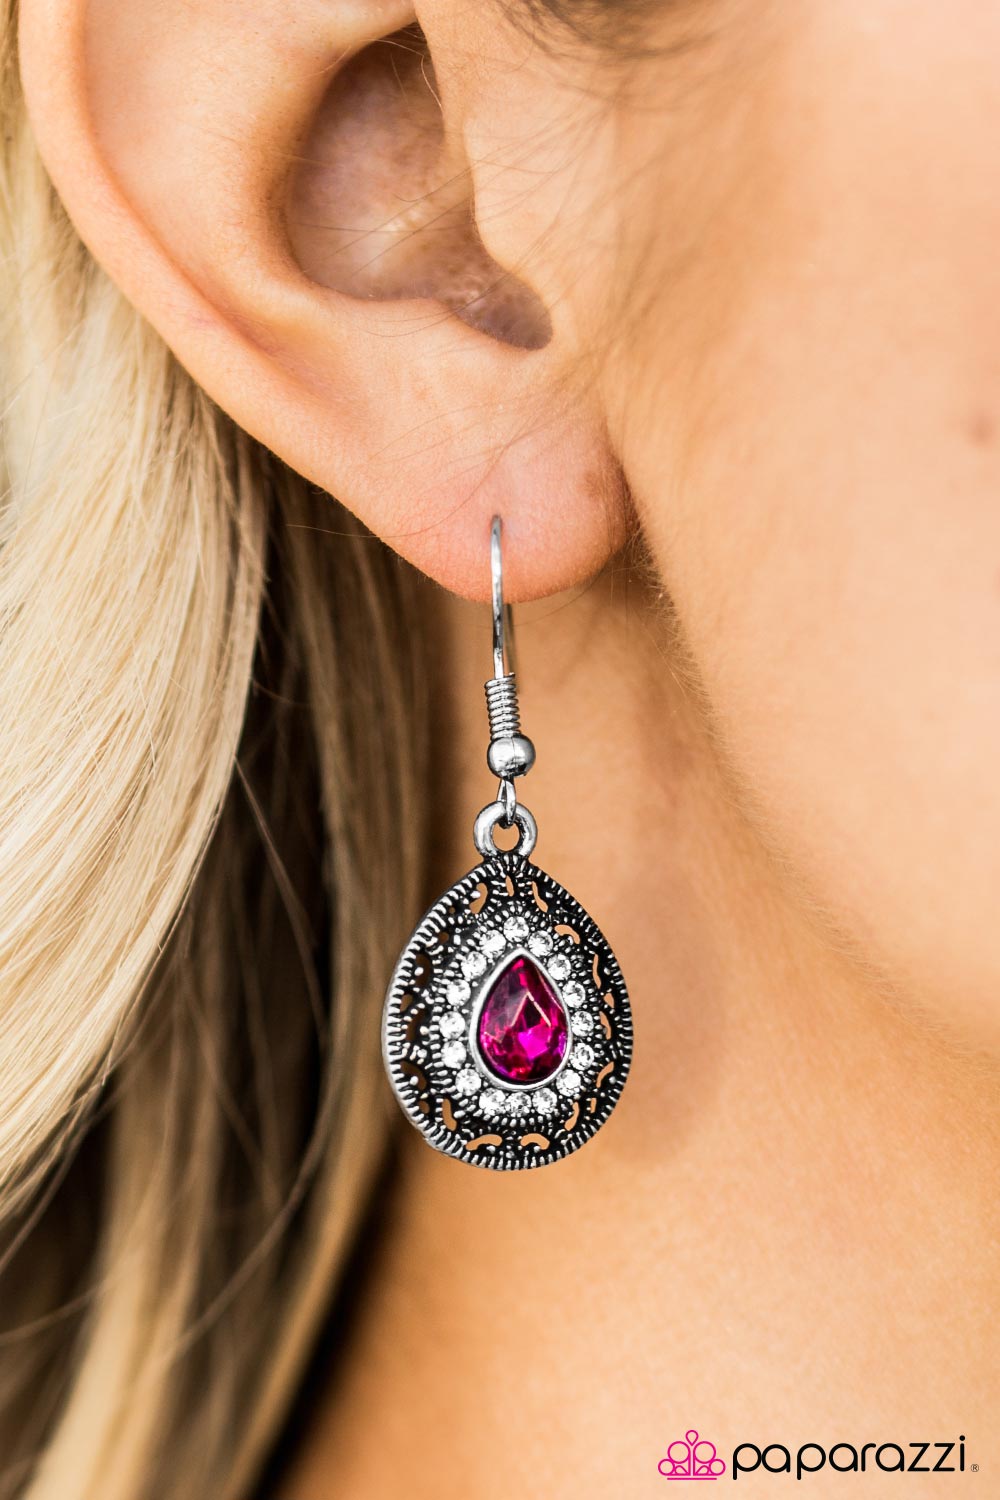 Falling In LOUVRE With You - Paparazzi earrings